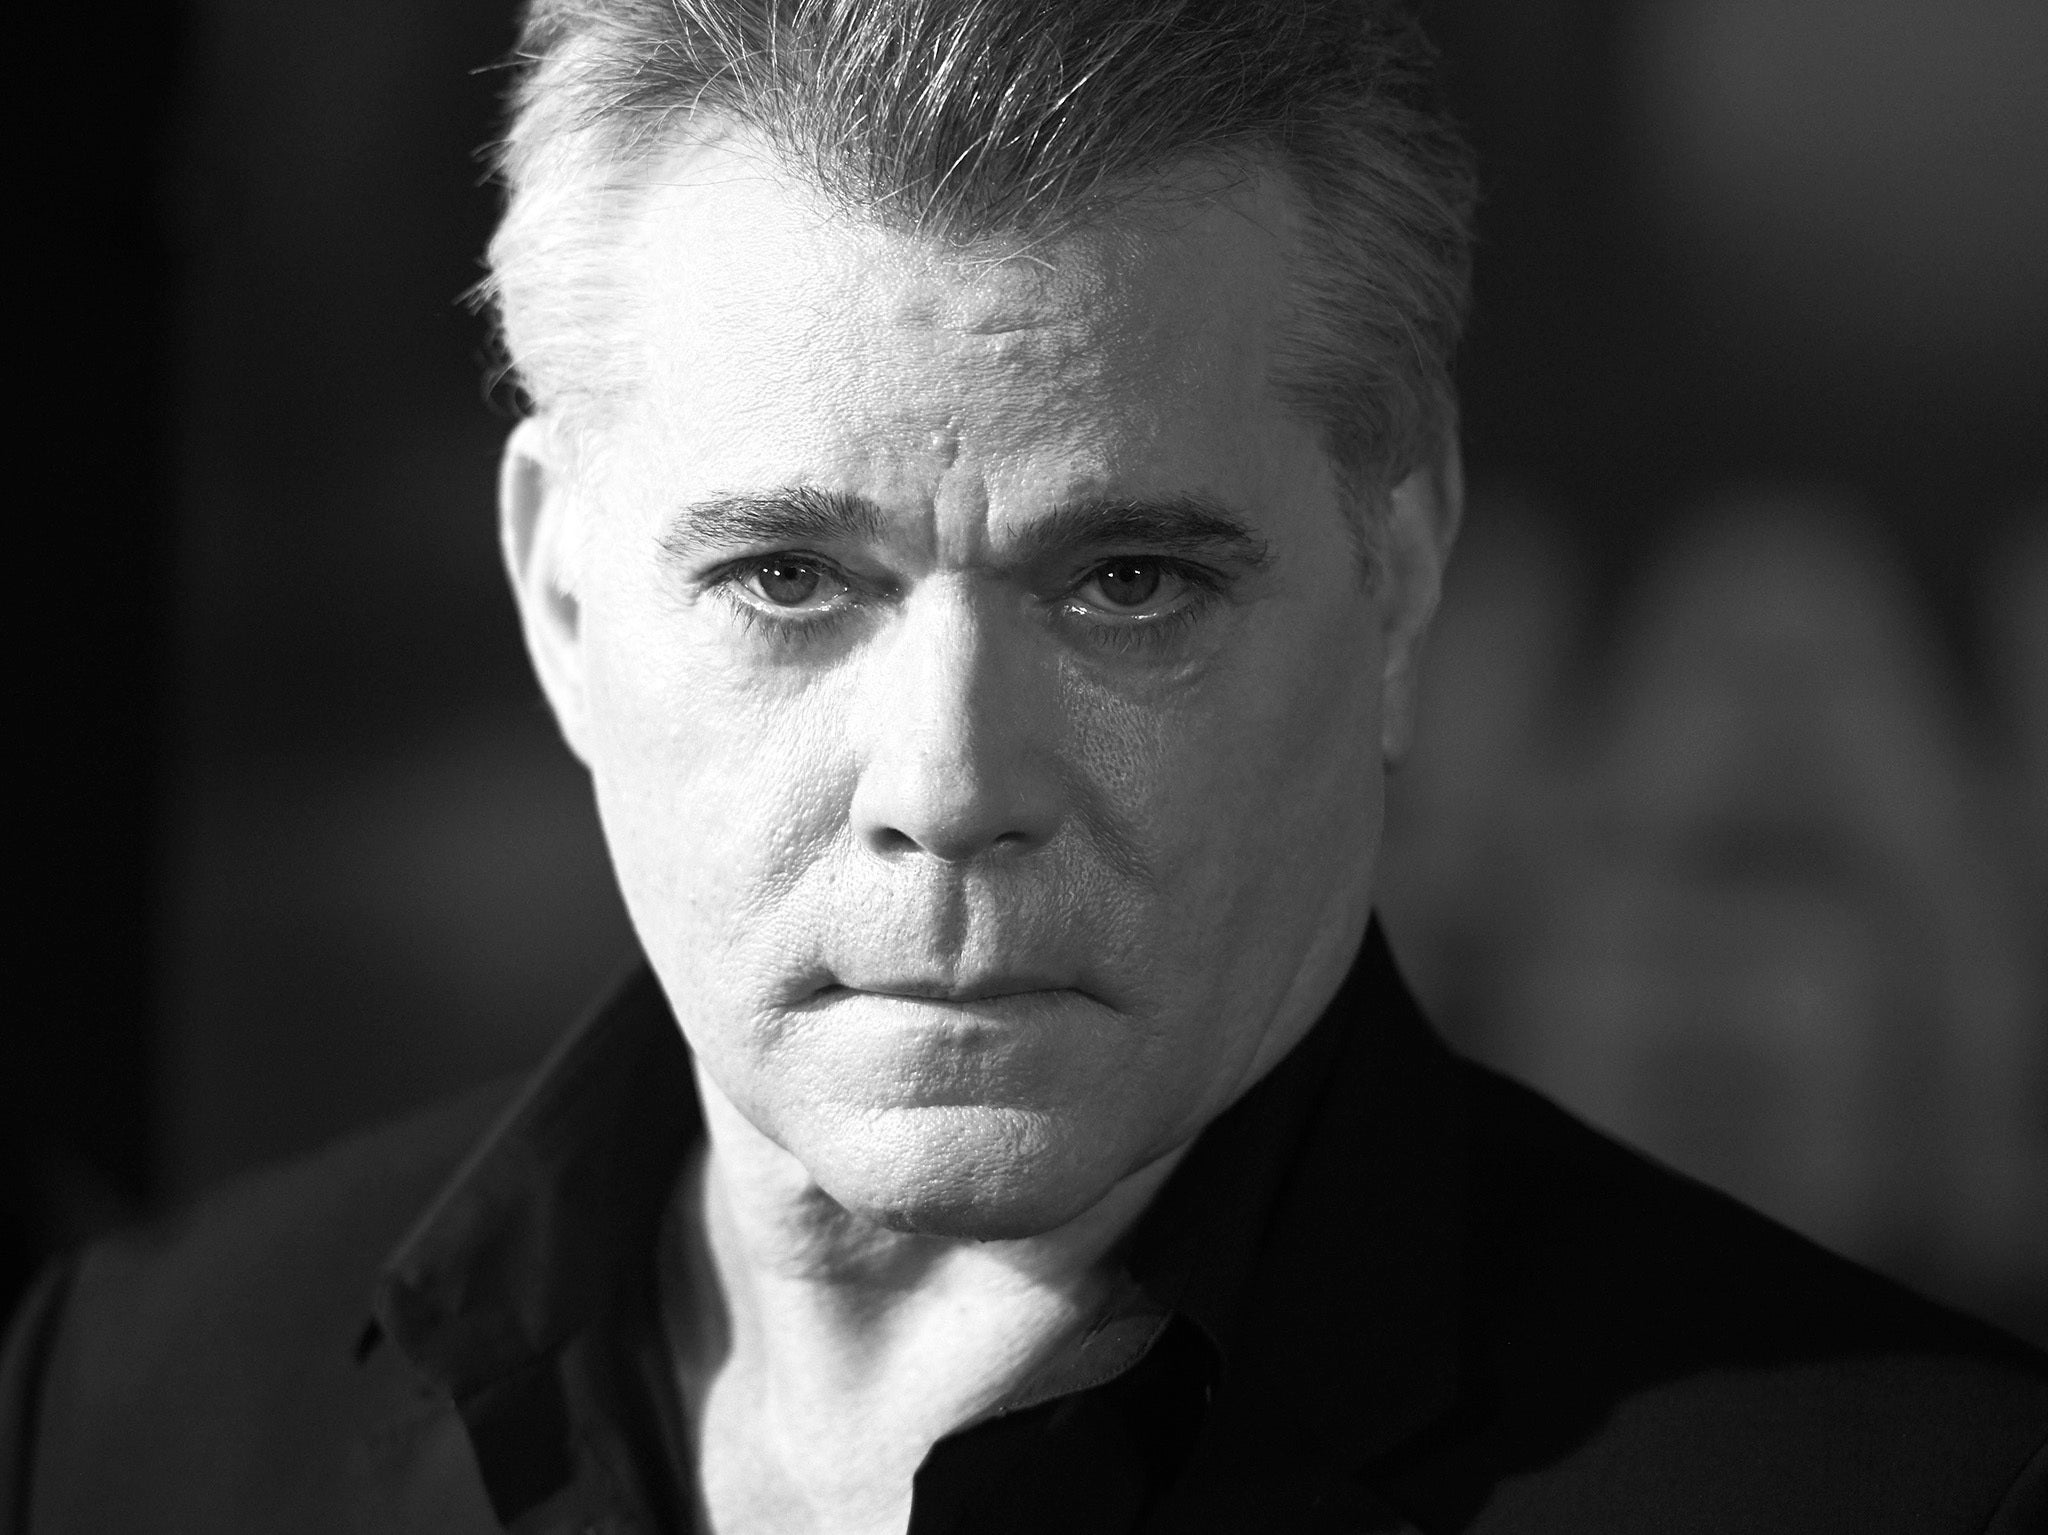 Ray Liotta, star of ‘Goodfellas’, ‘Cop Land’ and ‘Marriage Story’, has died at the age of 67